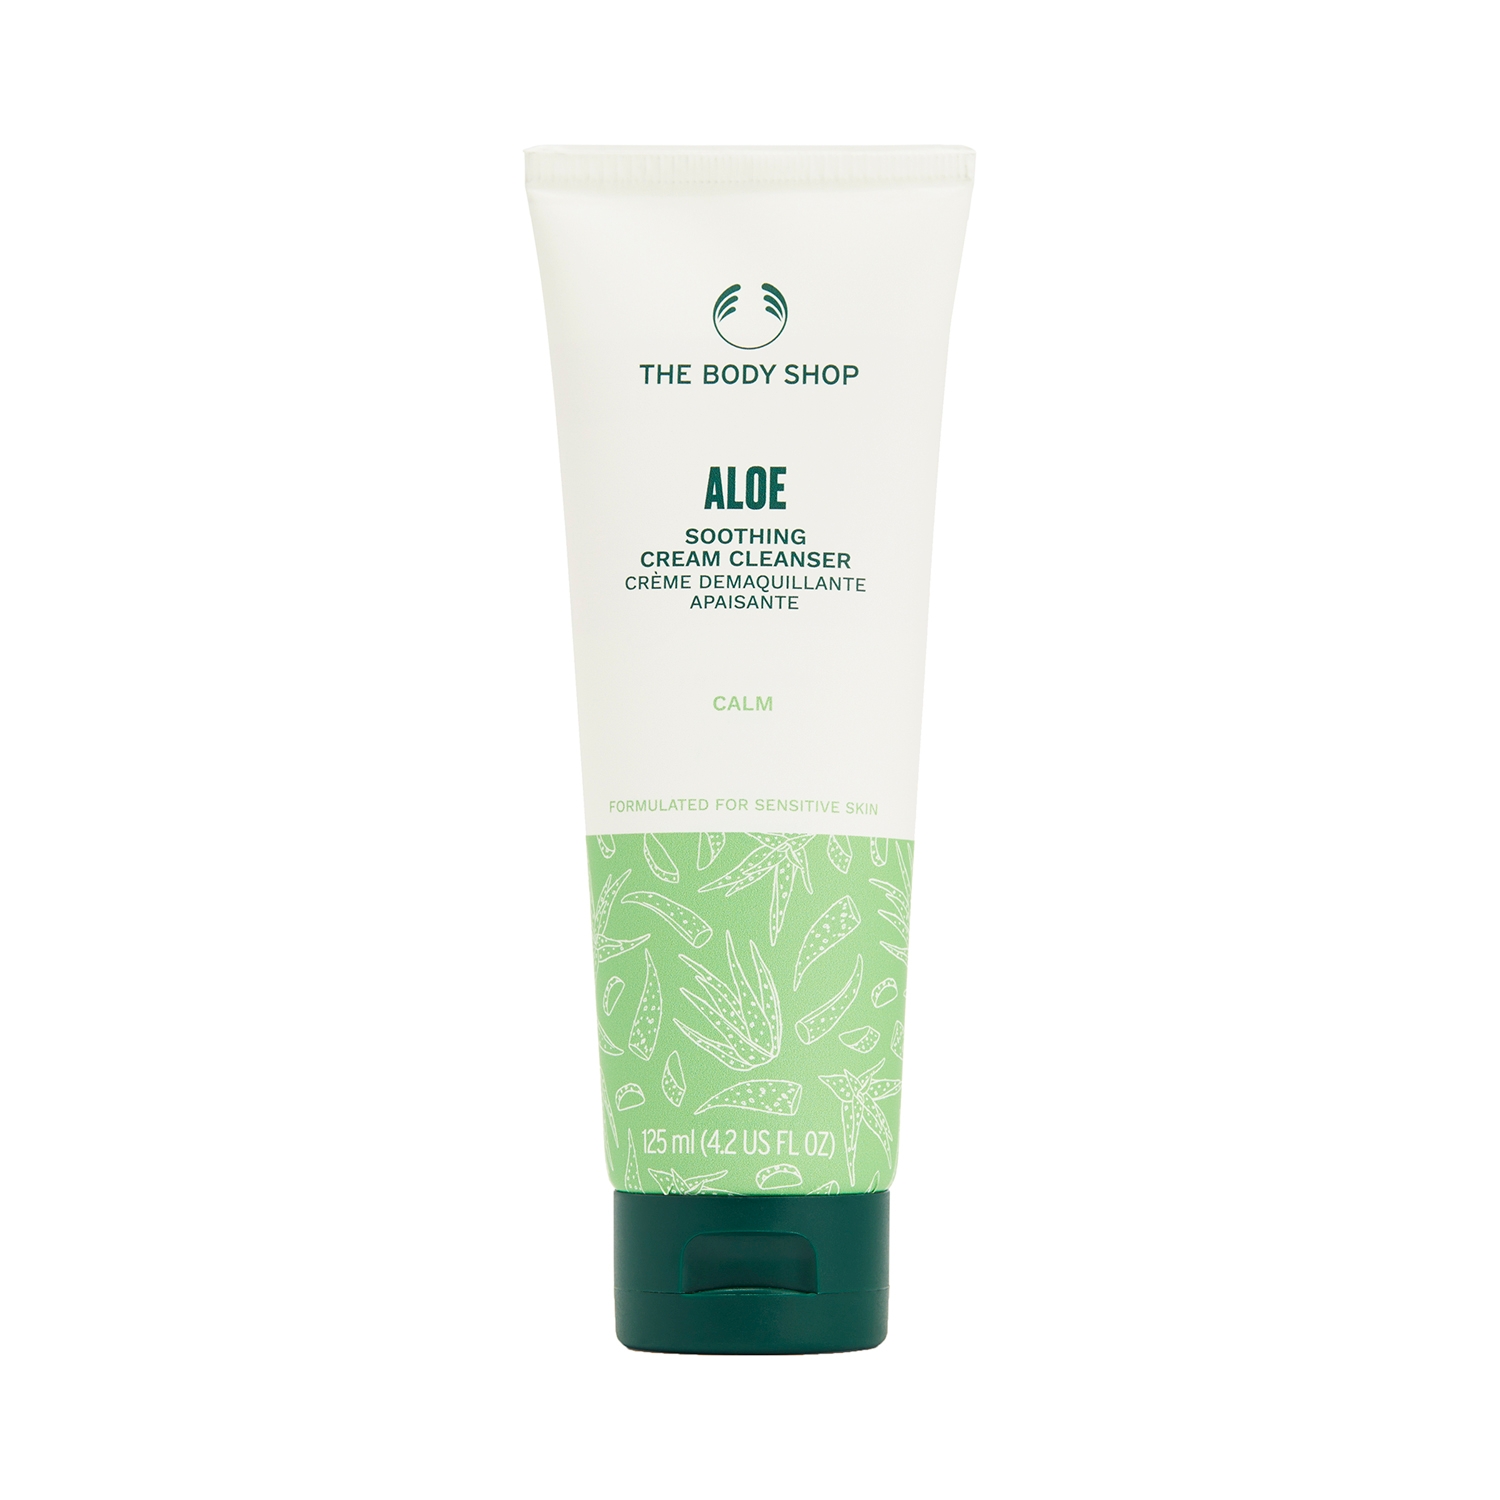 The Body Shop Aloe Soothing Cream Cleanser (125ml)